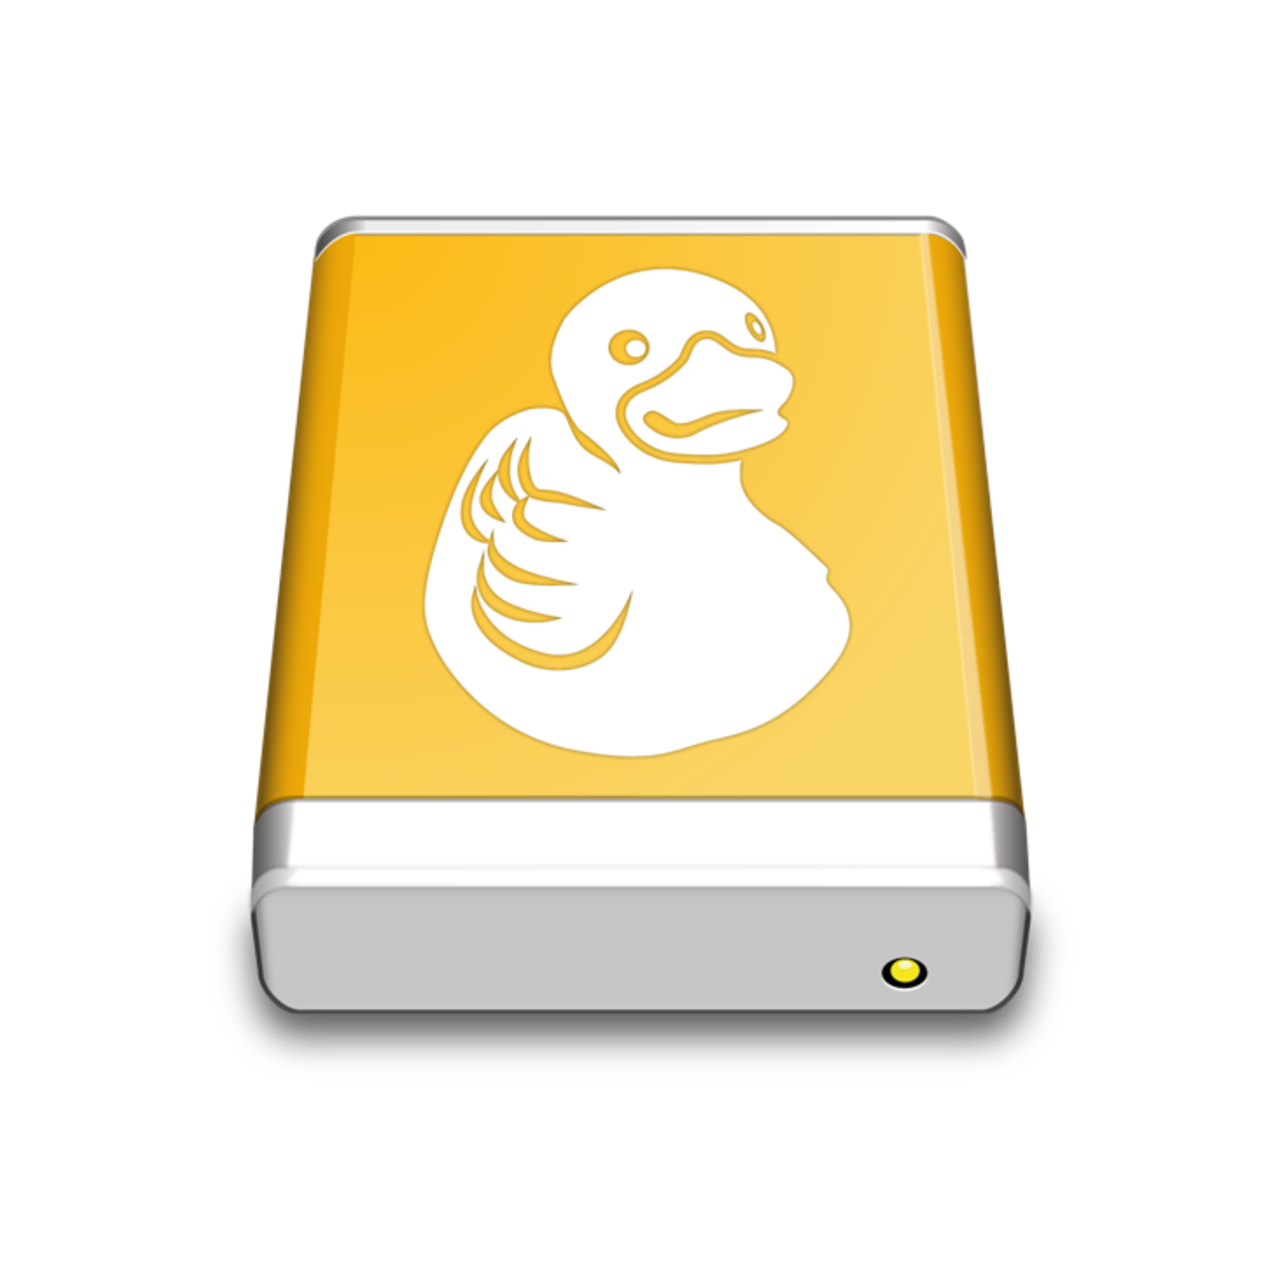 Mountain Duck 4.15.1.21679 for ios download